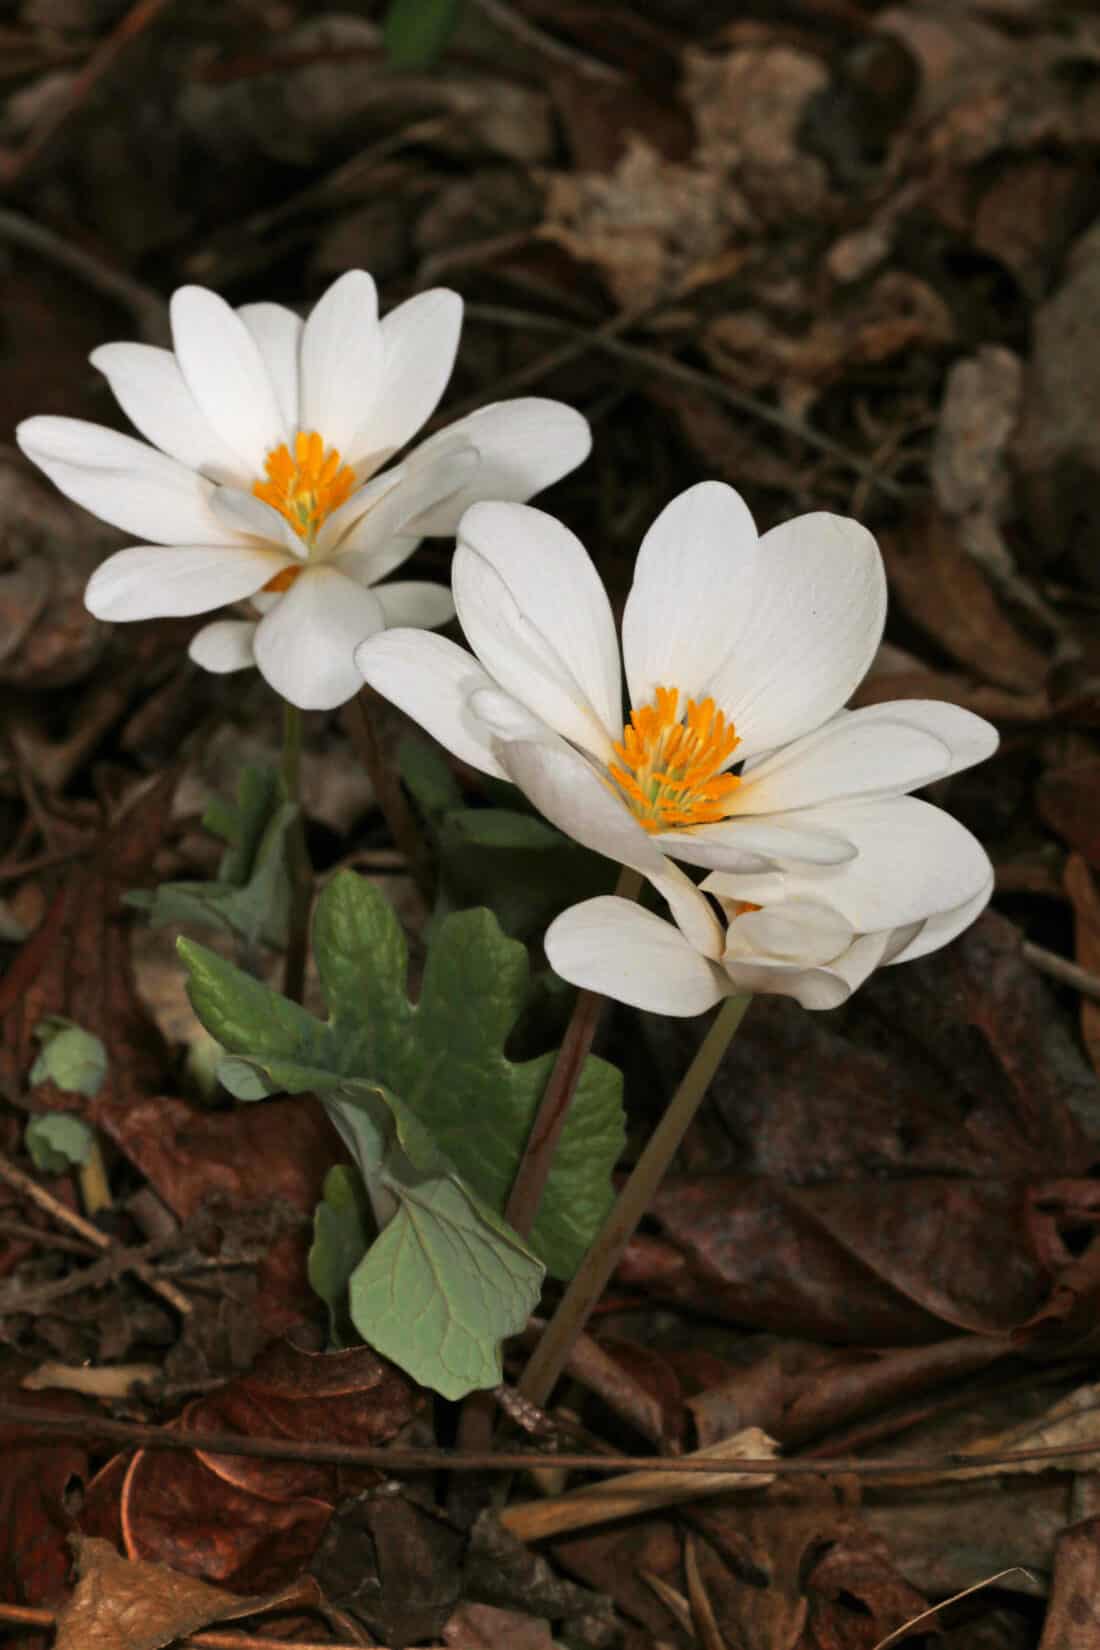 Three white Sanguinaria canadensis flowers on the ground.